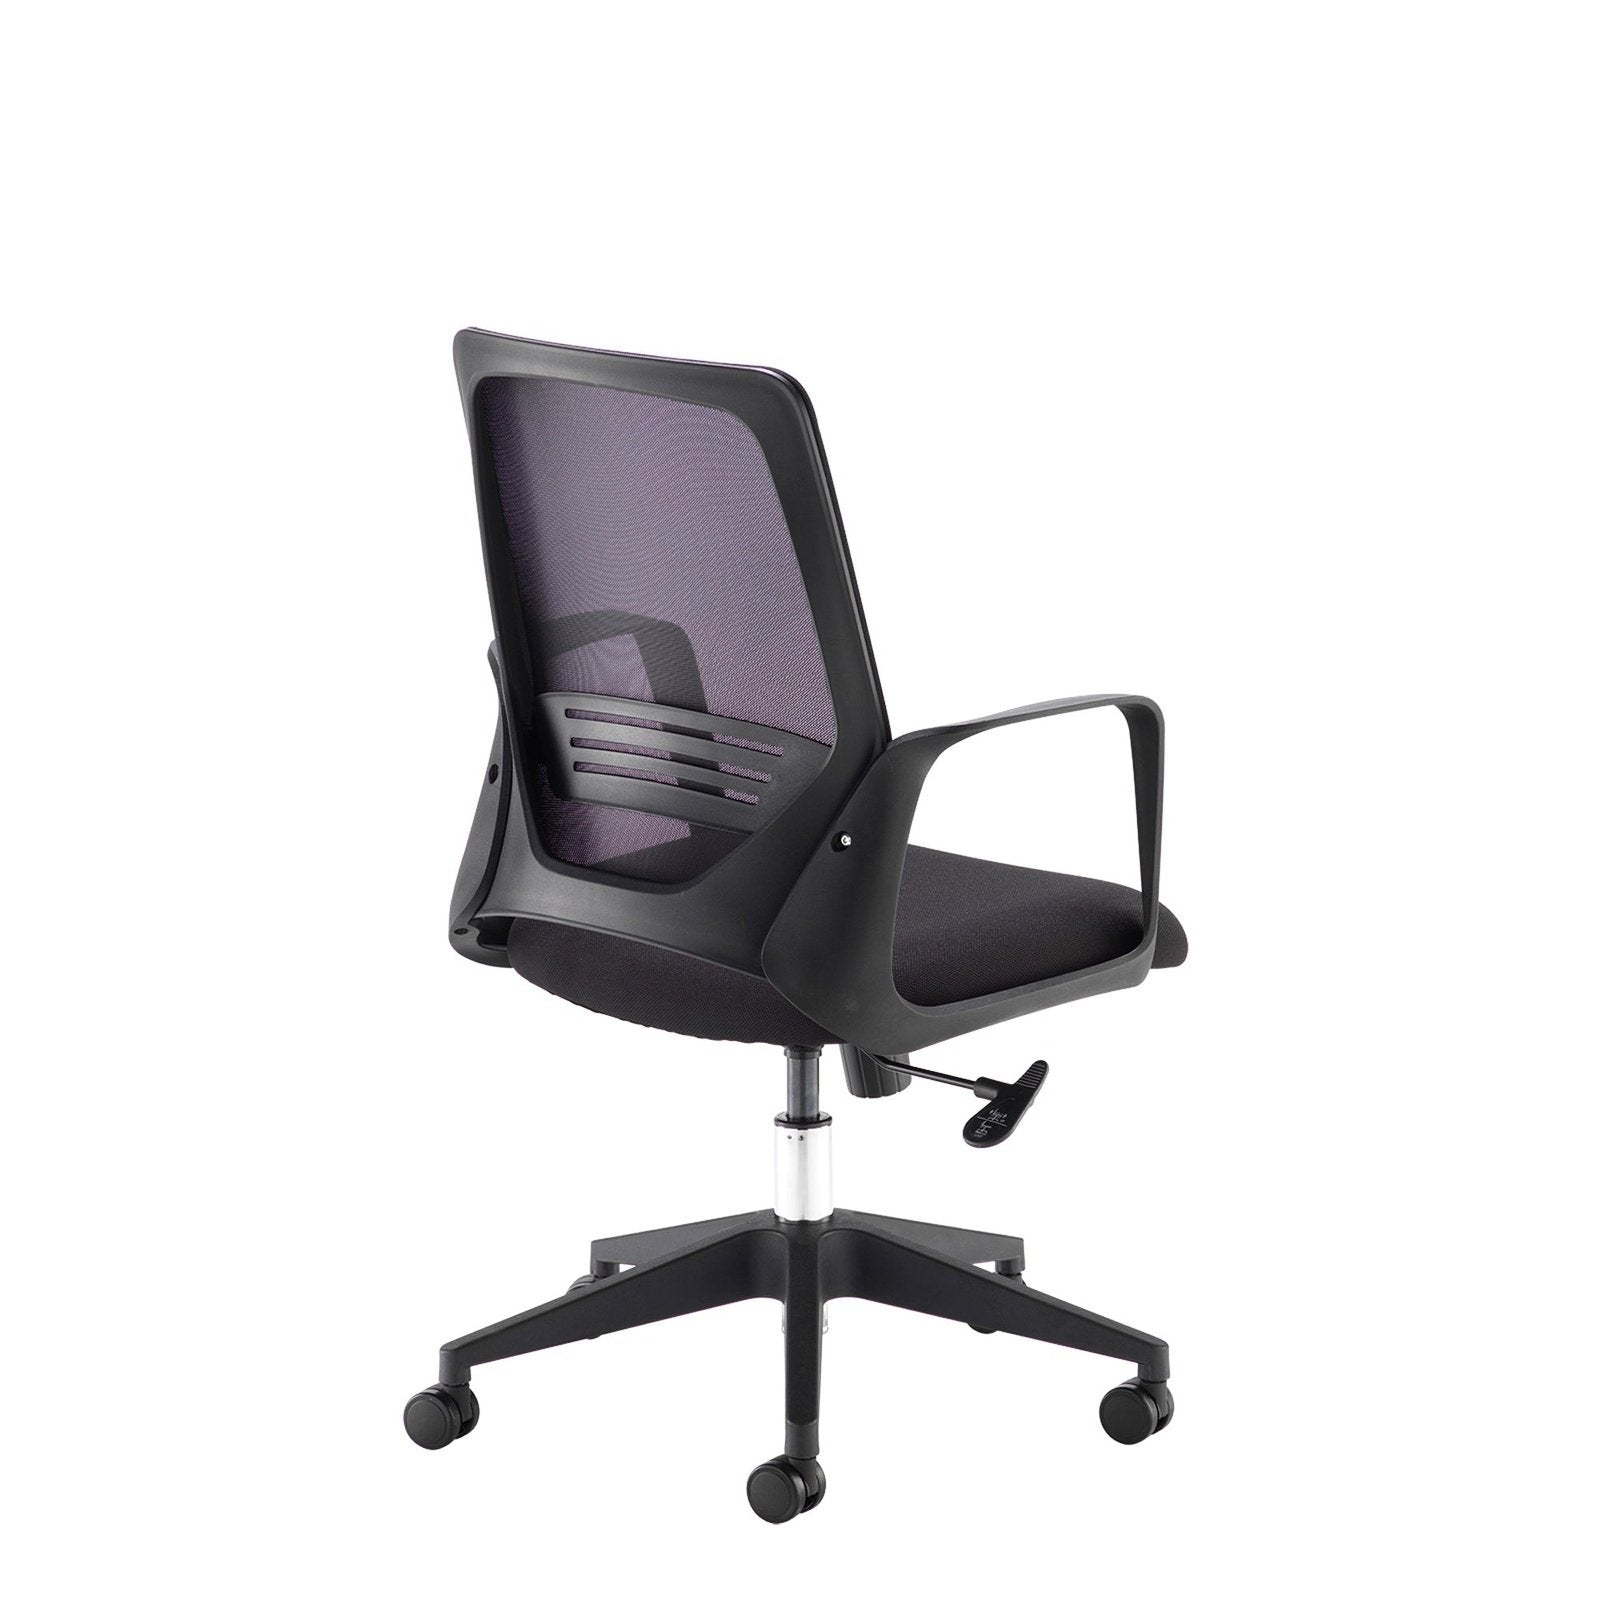 Toto mesh back operator chair with fabric seat and black base - Office Products Online